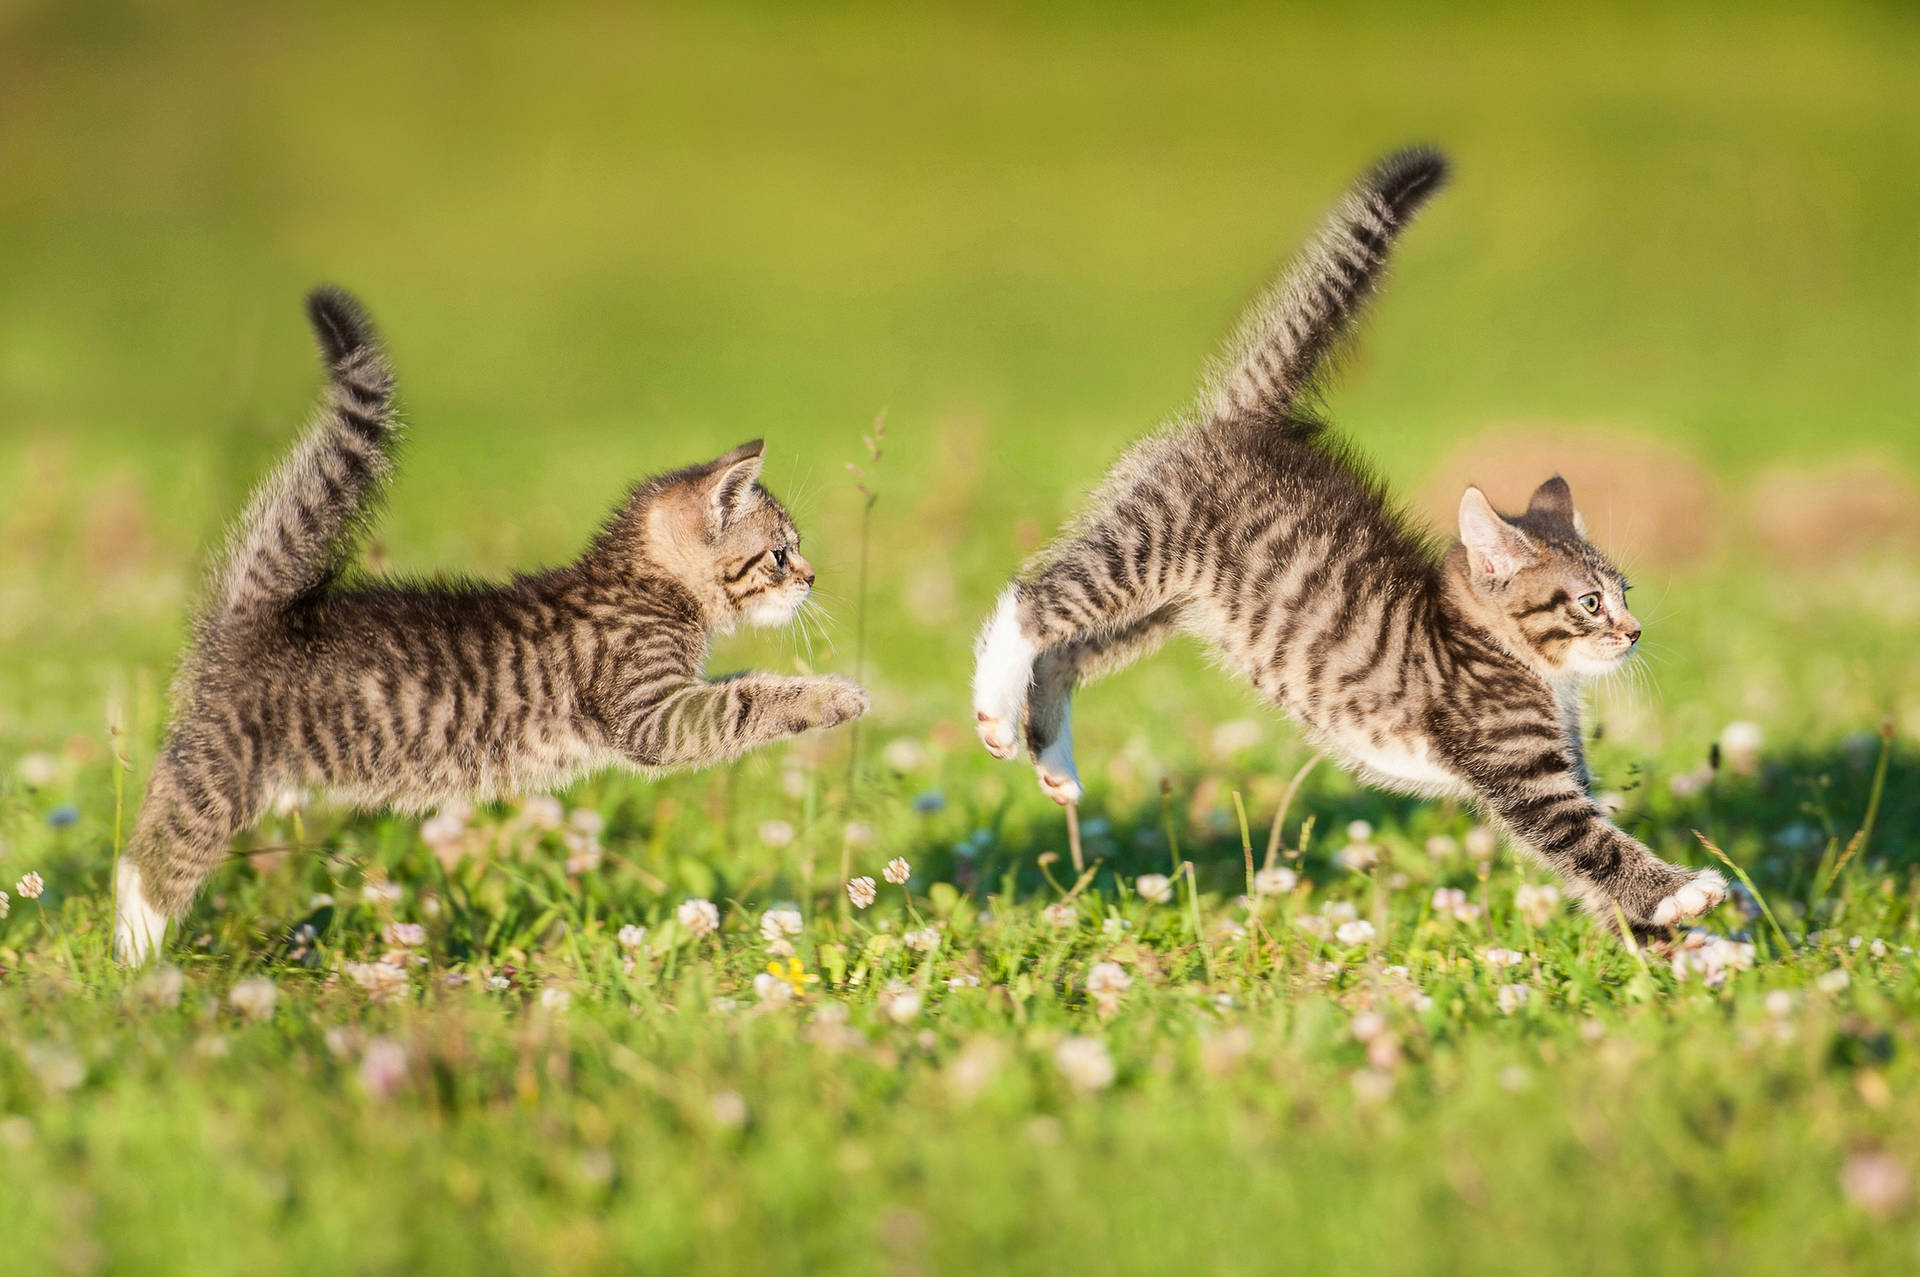 Two Kittens Playing Outdoors